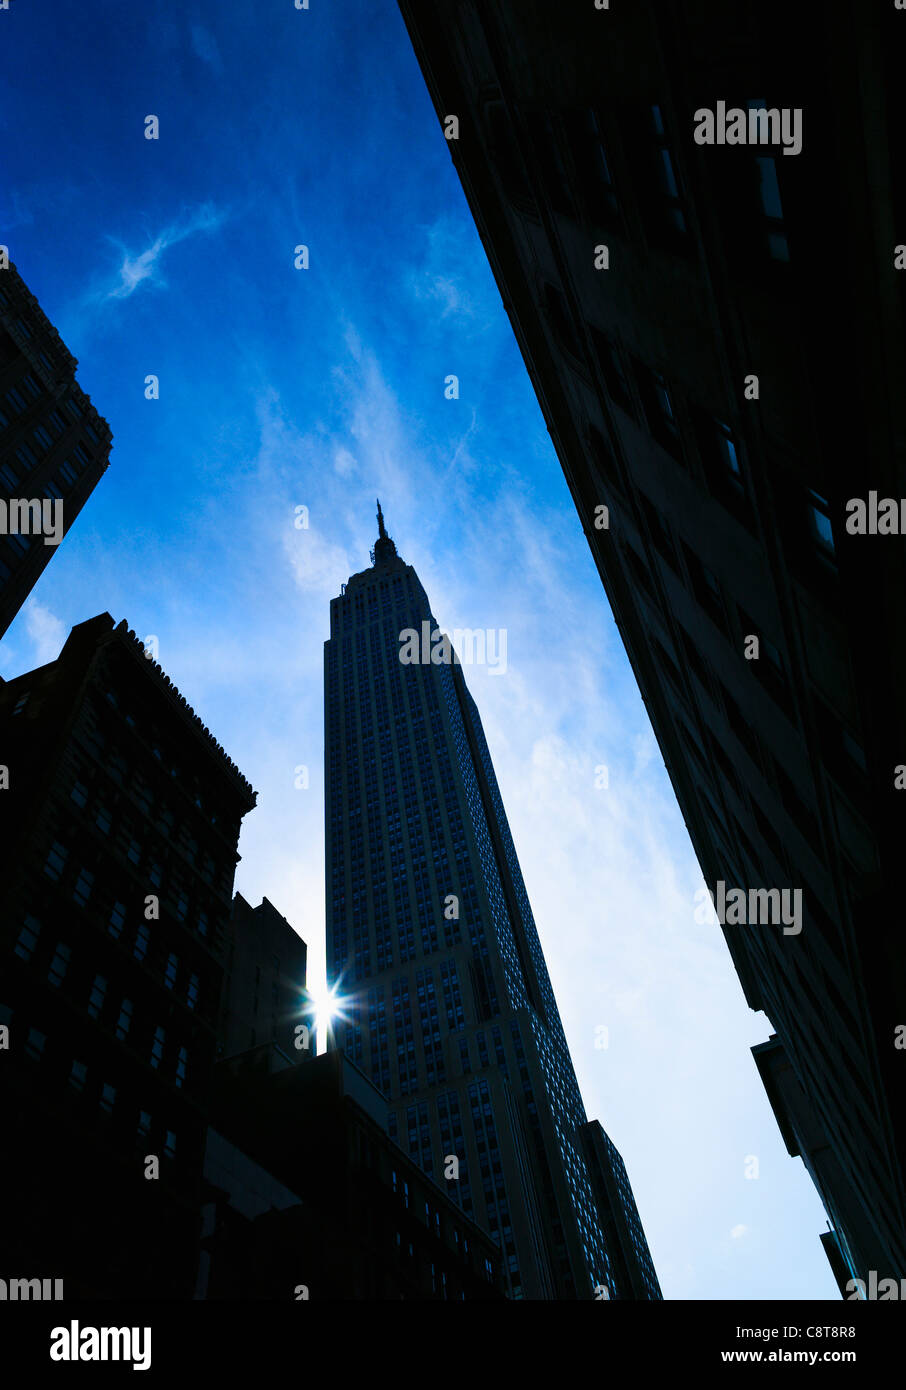 USA, New York City, Empire State Building with solar flare Stock Photo